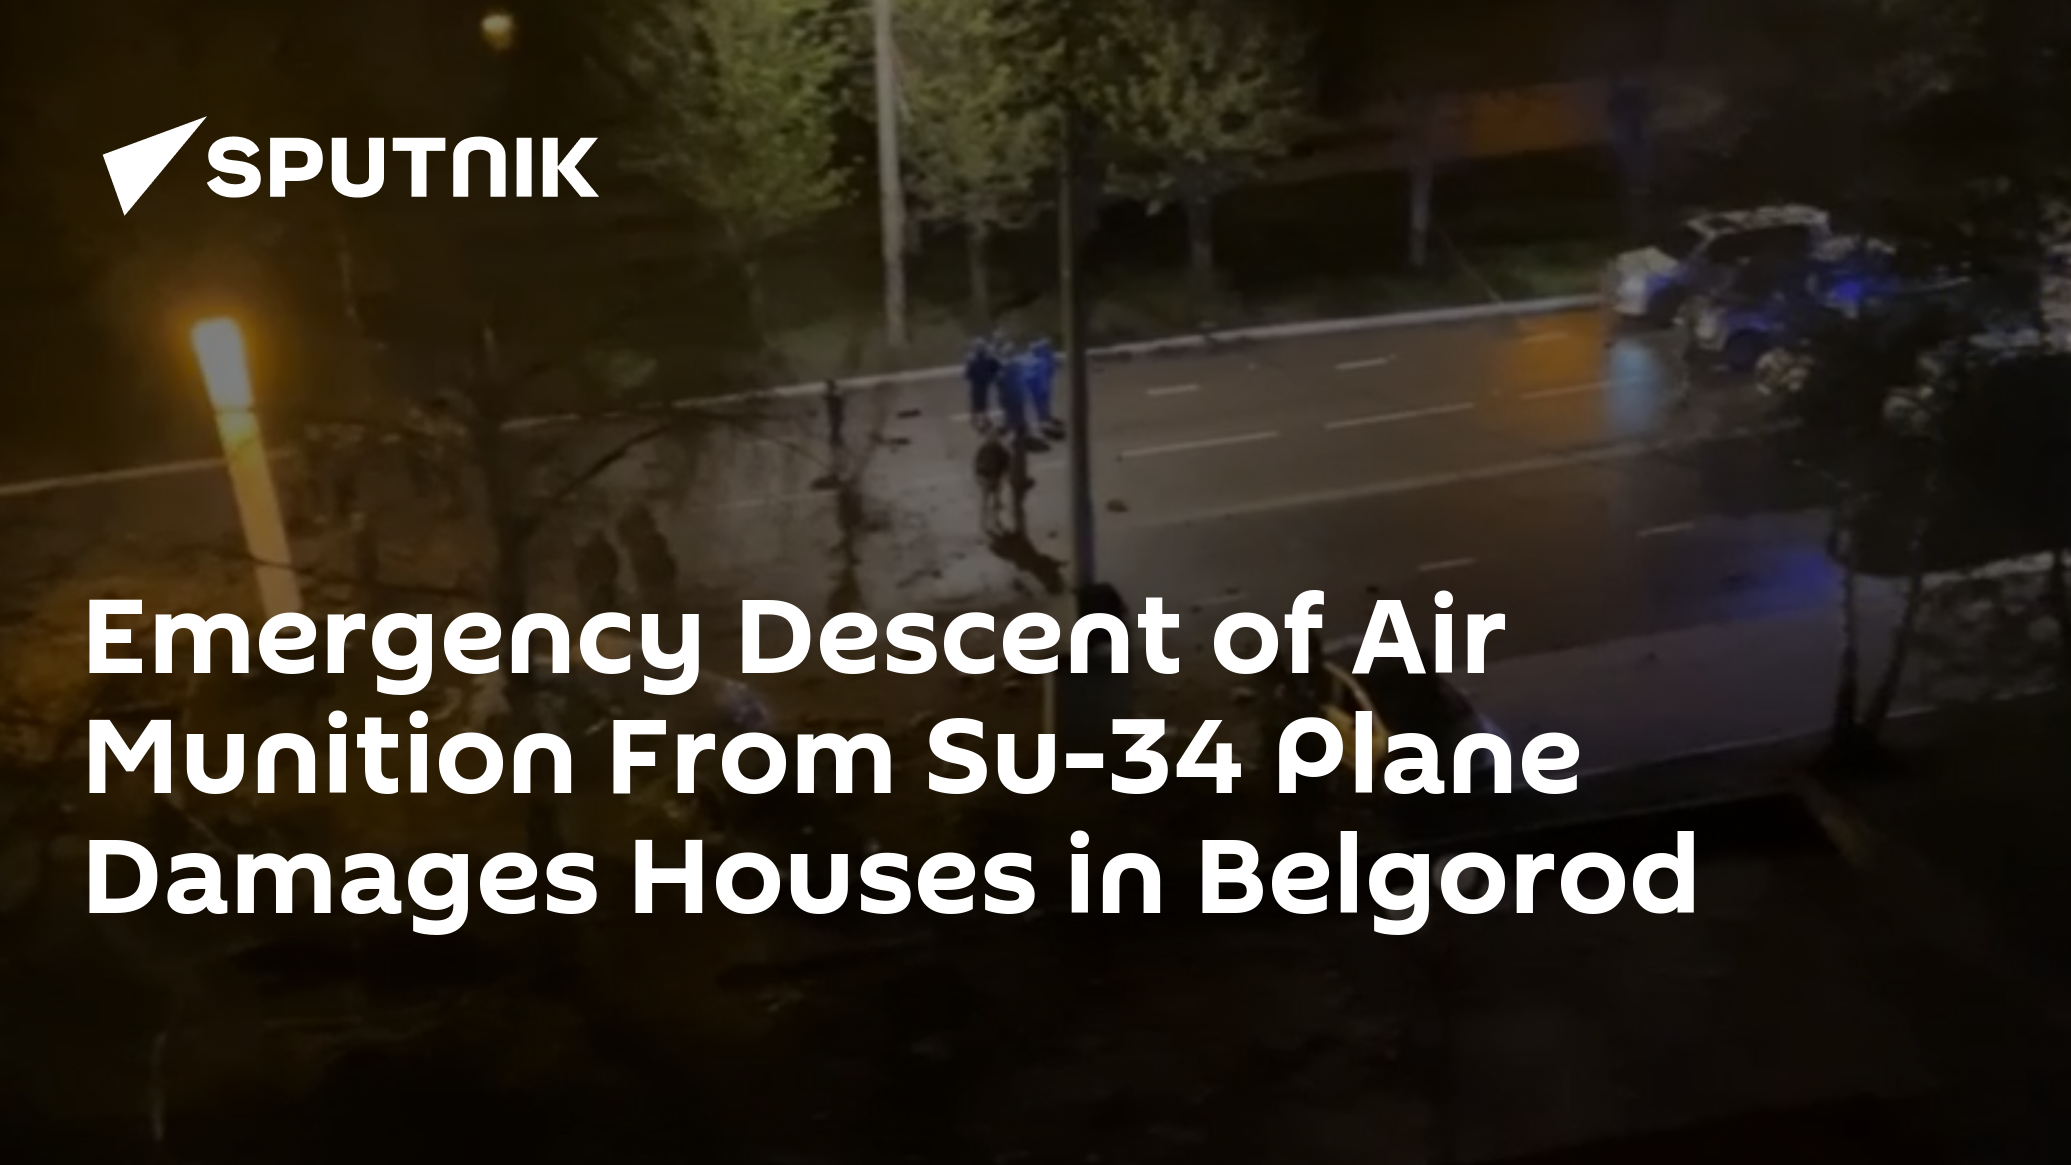 Emergency Descent of Air Munition From Su-34 Plane Damages Houses in Belgorod – Moscow